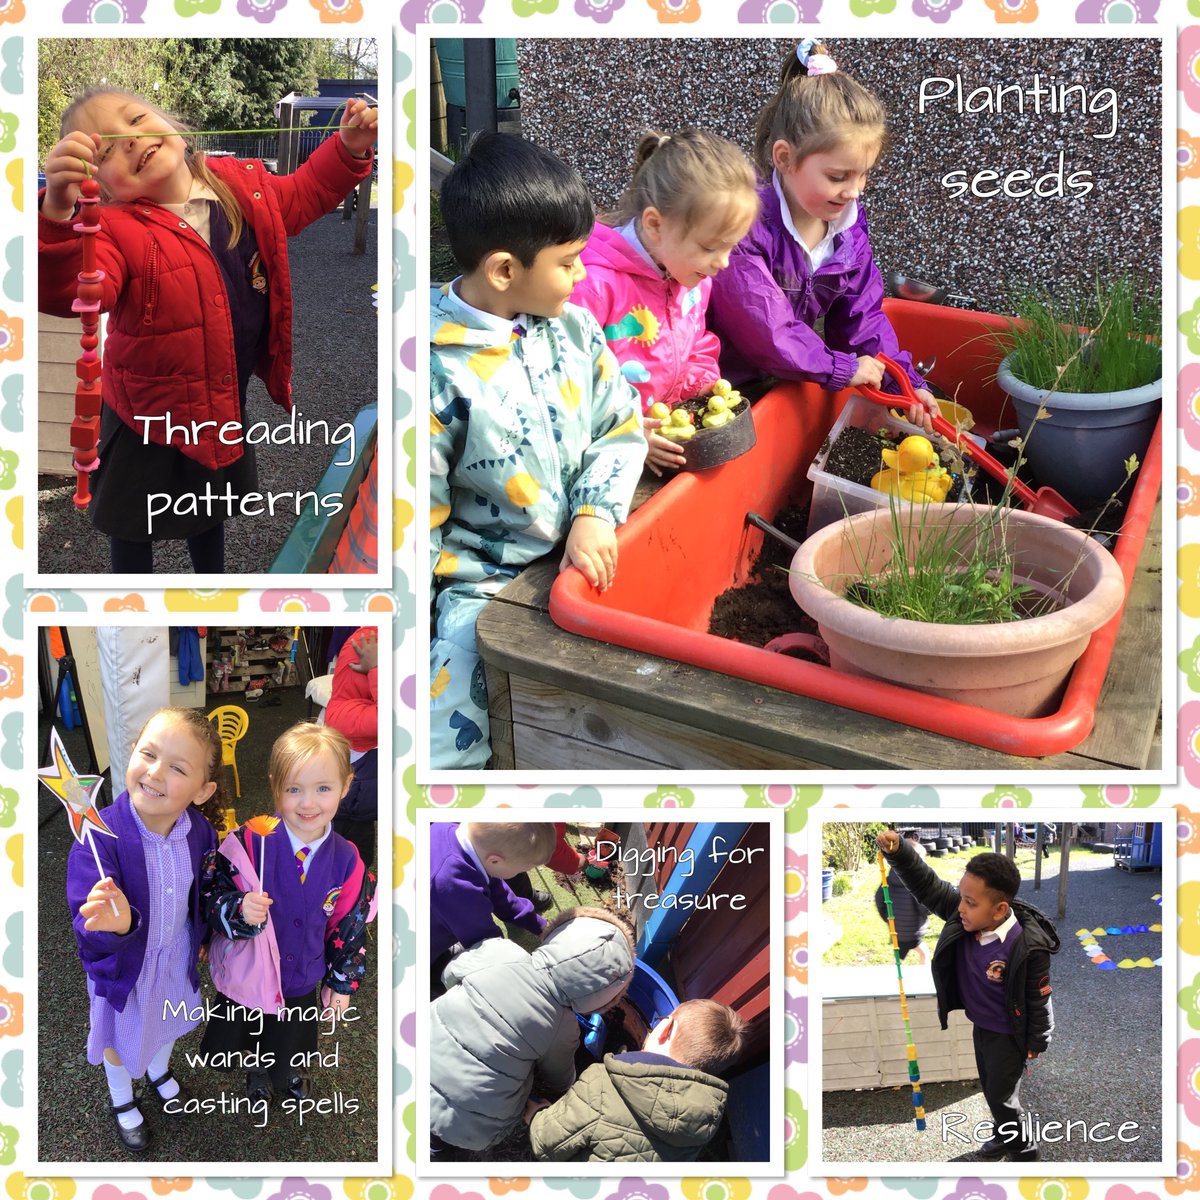 It’s been a very busy day in Reception today! The children have explored our outdoor area beautifully and are developing their gross and fine motor skills. Fab team work, too! #rps #outdoorprovision #grossmotorskills #teamwork